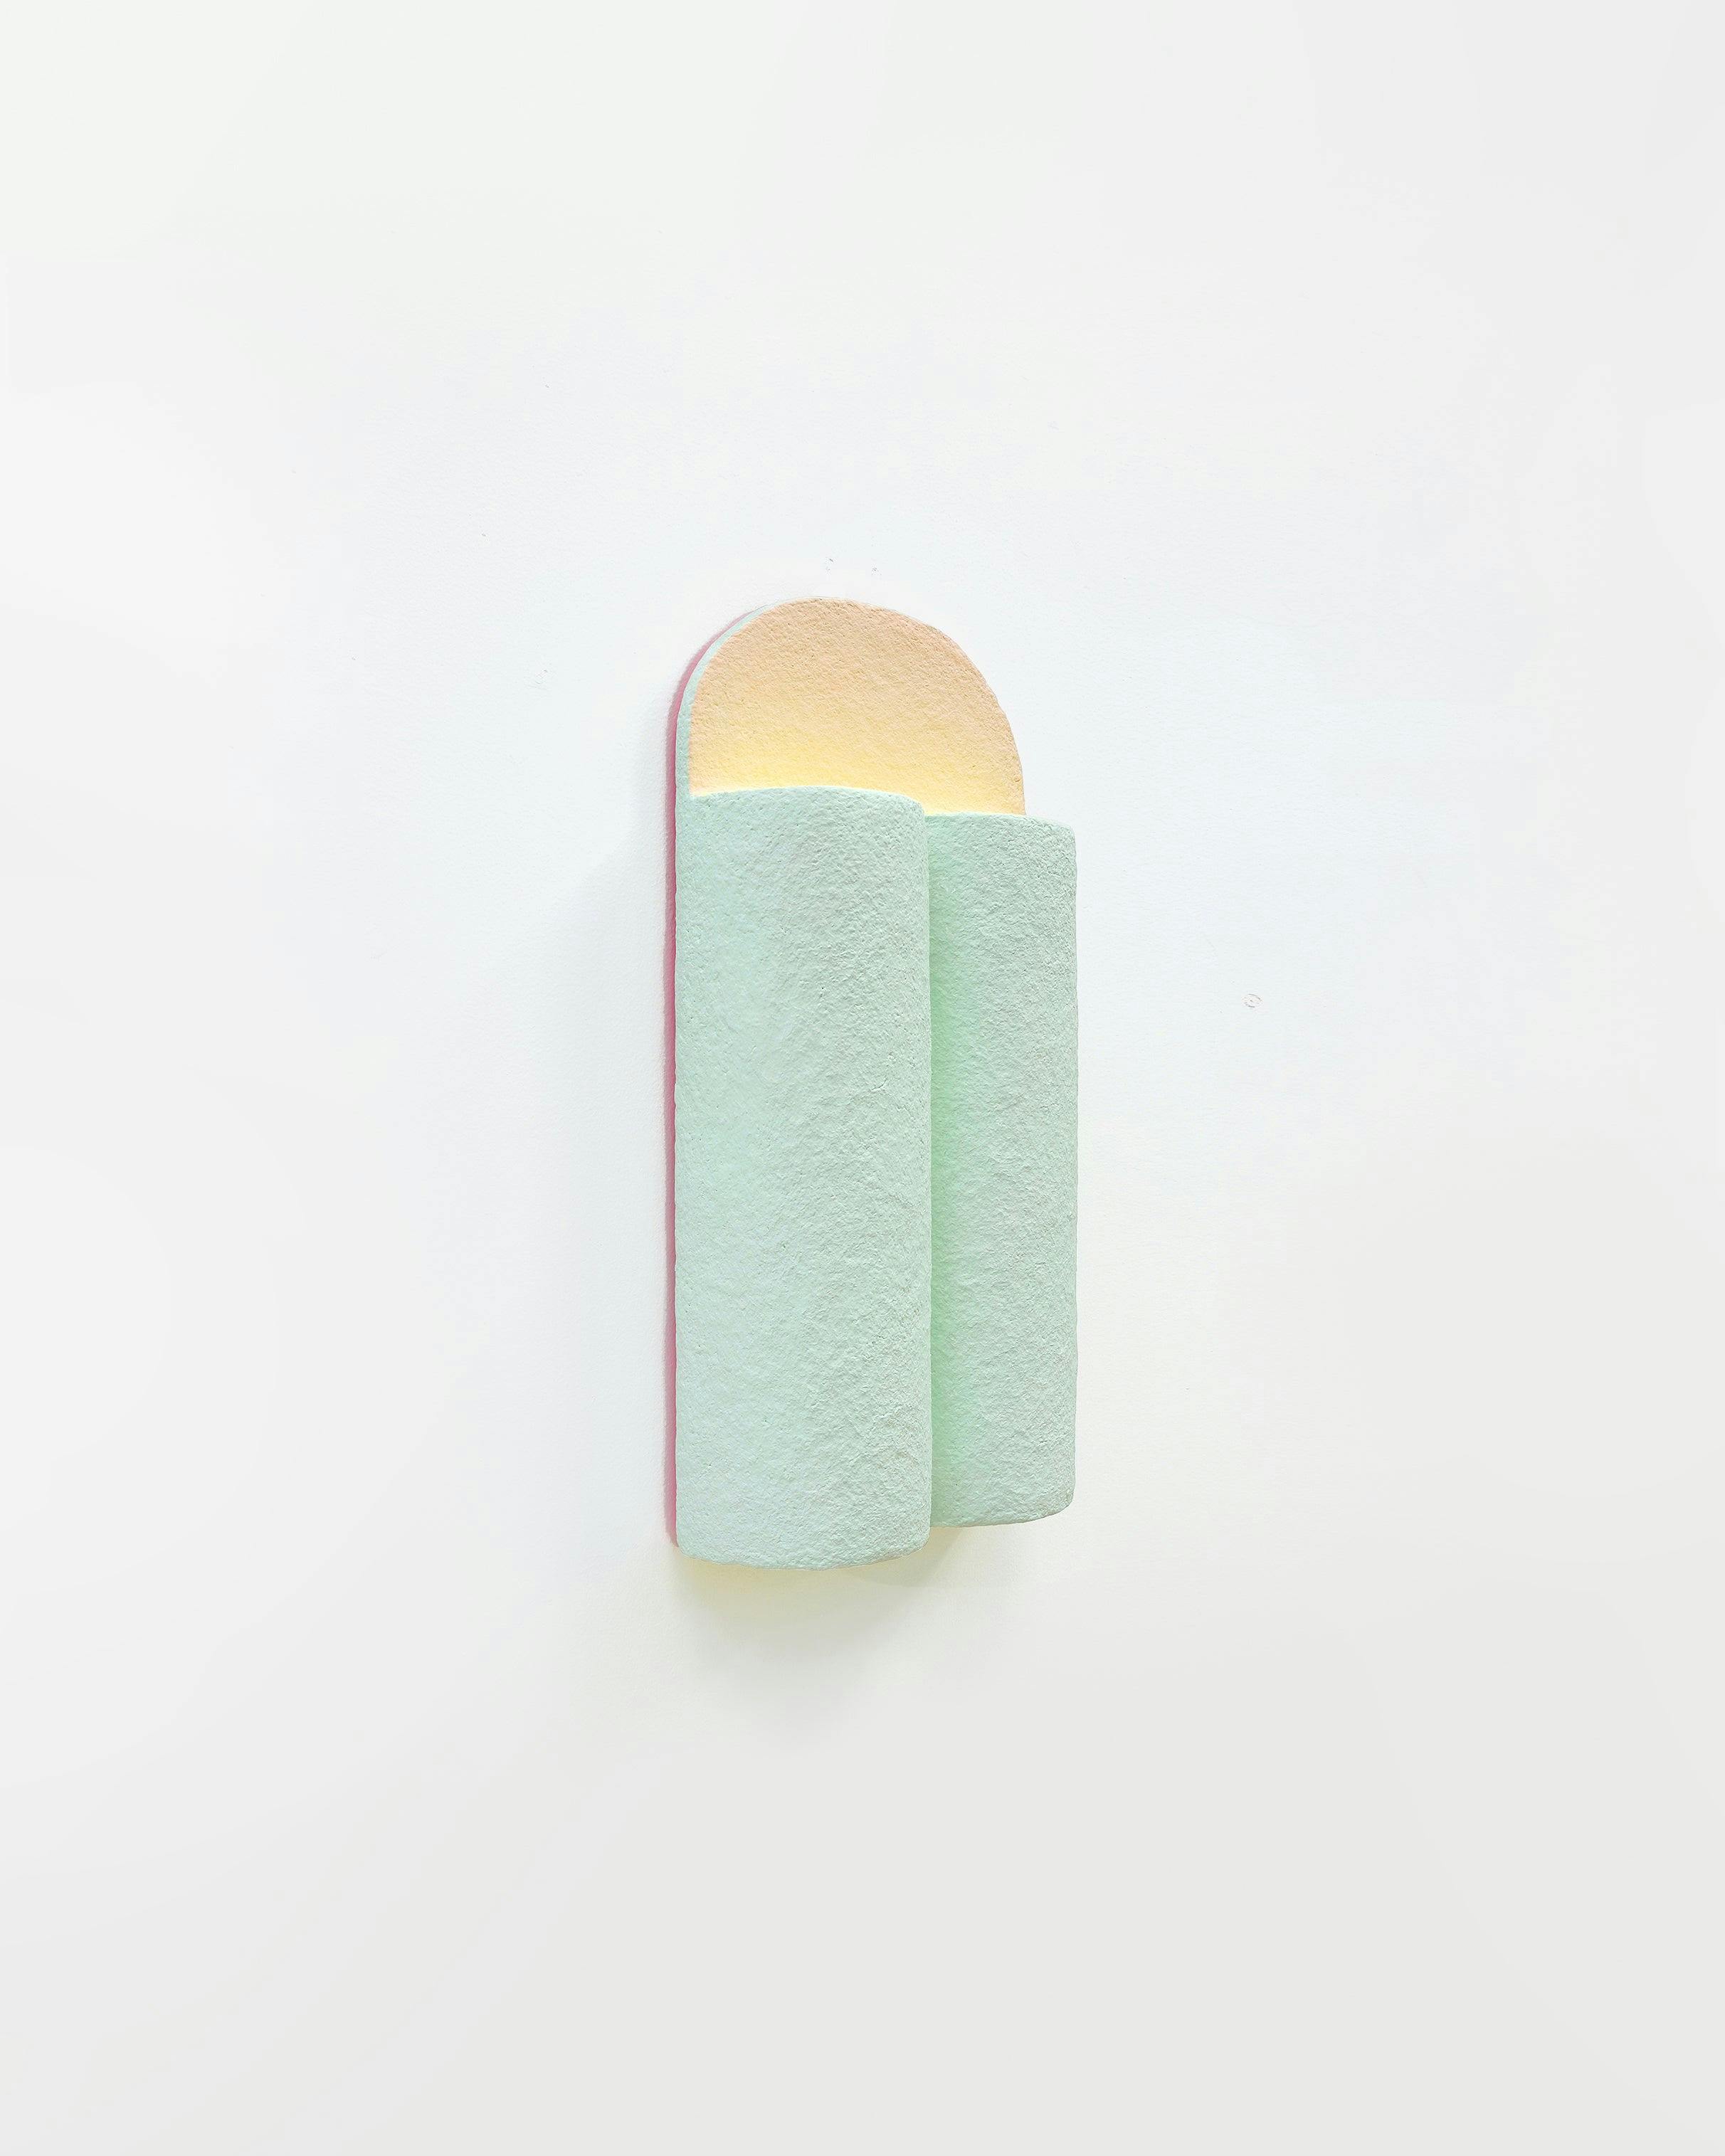 Mixed Media by Adam Frezza & Terri Chiao (CHIAOZZA) titled "Shrine to Nothingness (Pale Peach, Frostini, Fluorescent Chartreuse)".